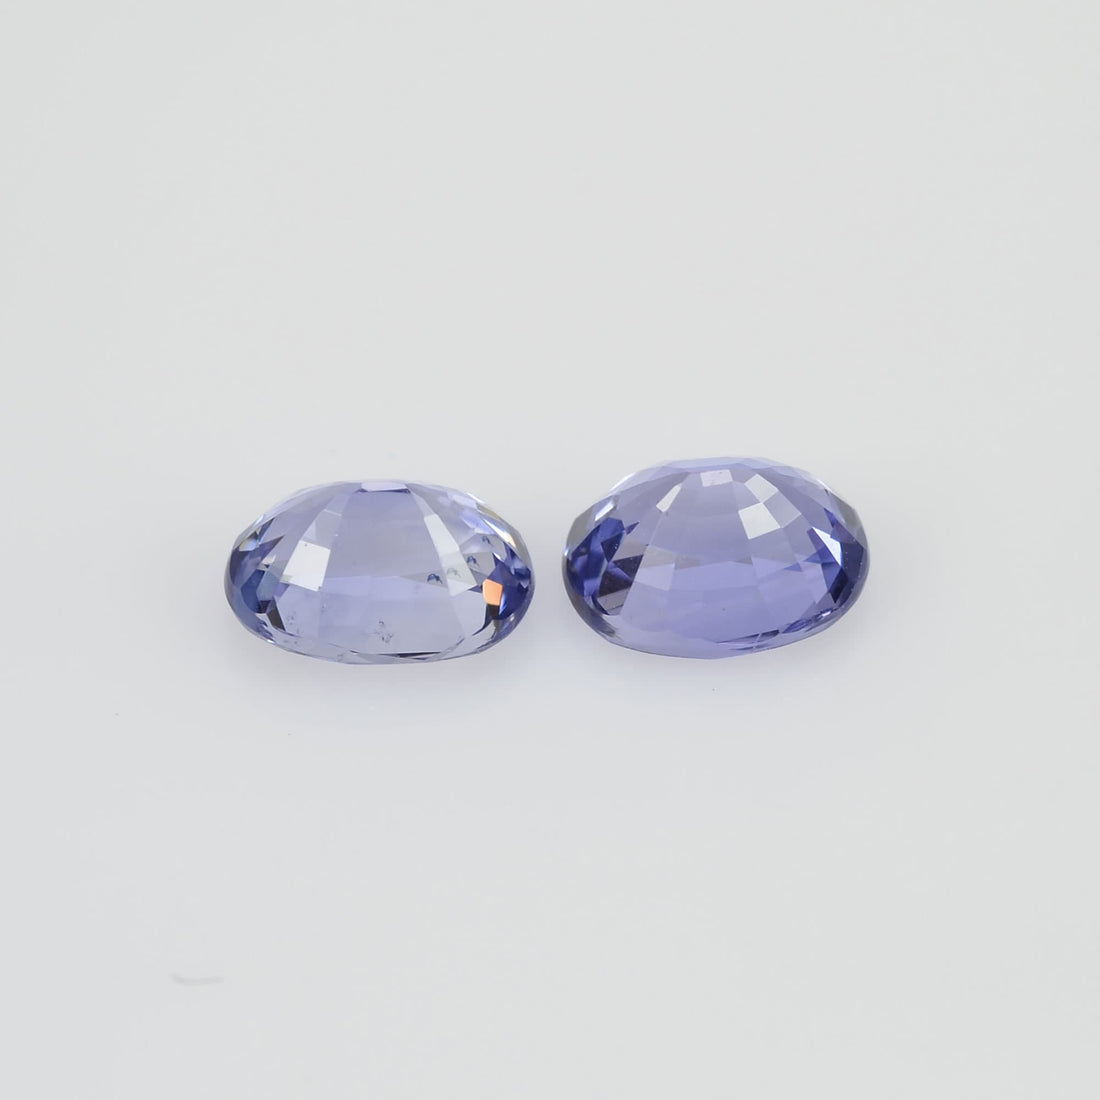 1.82 cts Natural Blue Sapphire Loose Pair Gemstone Oval Cut